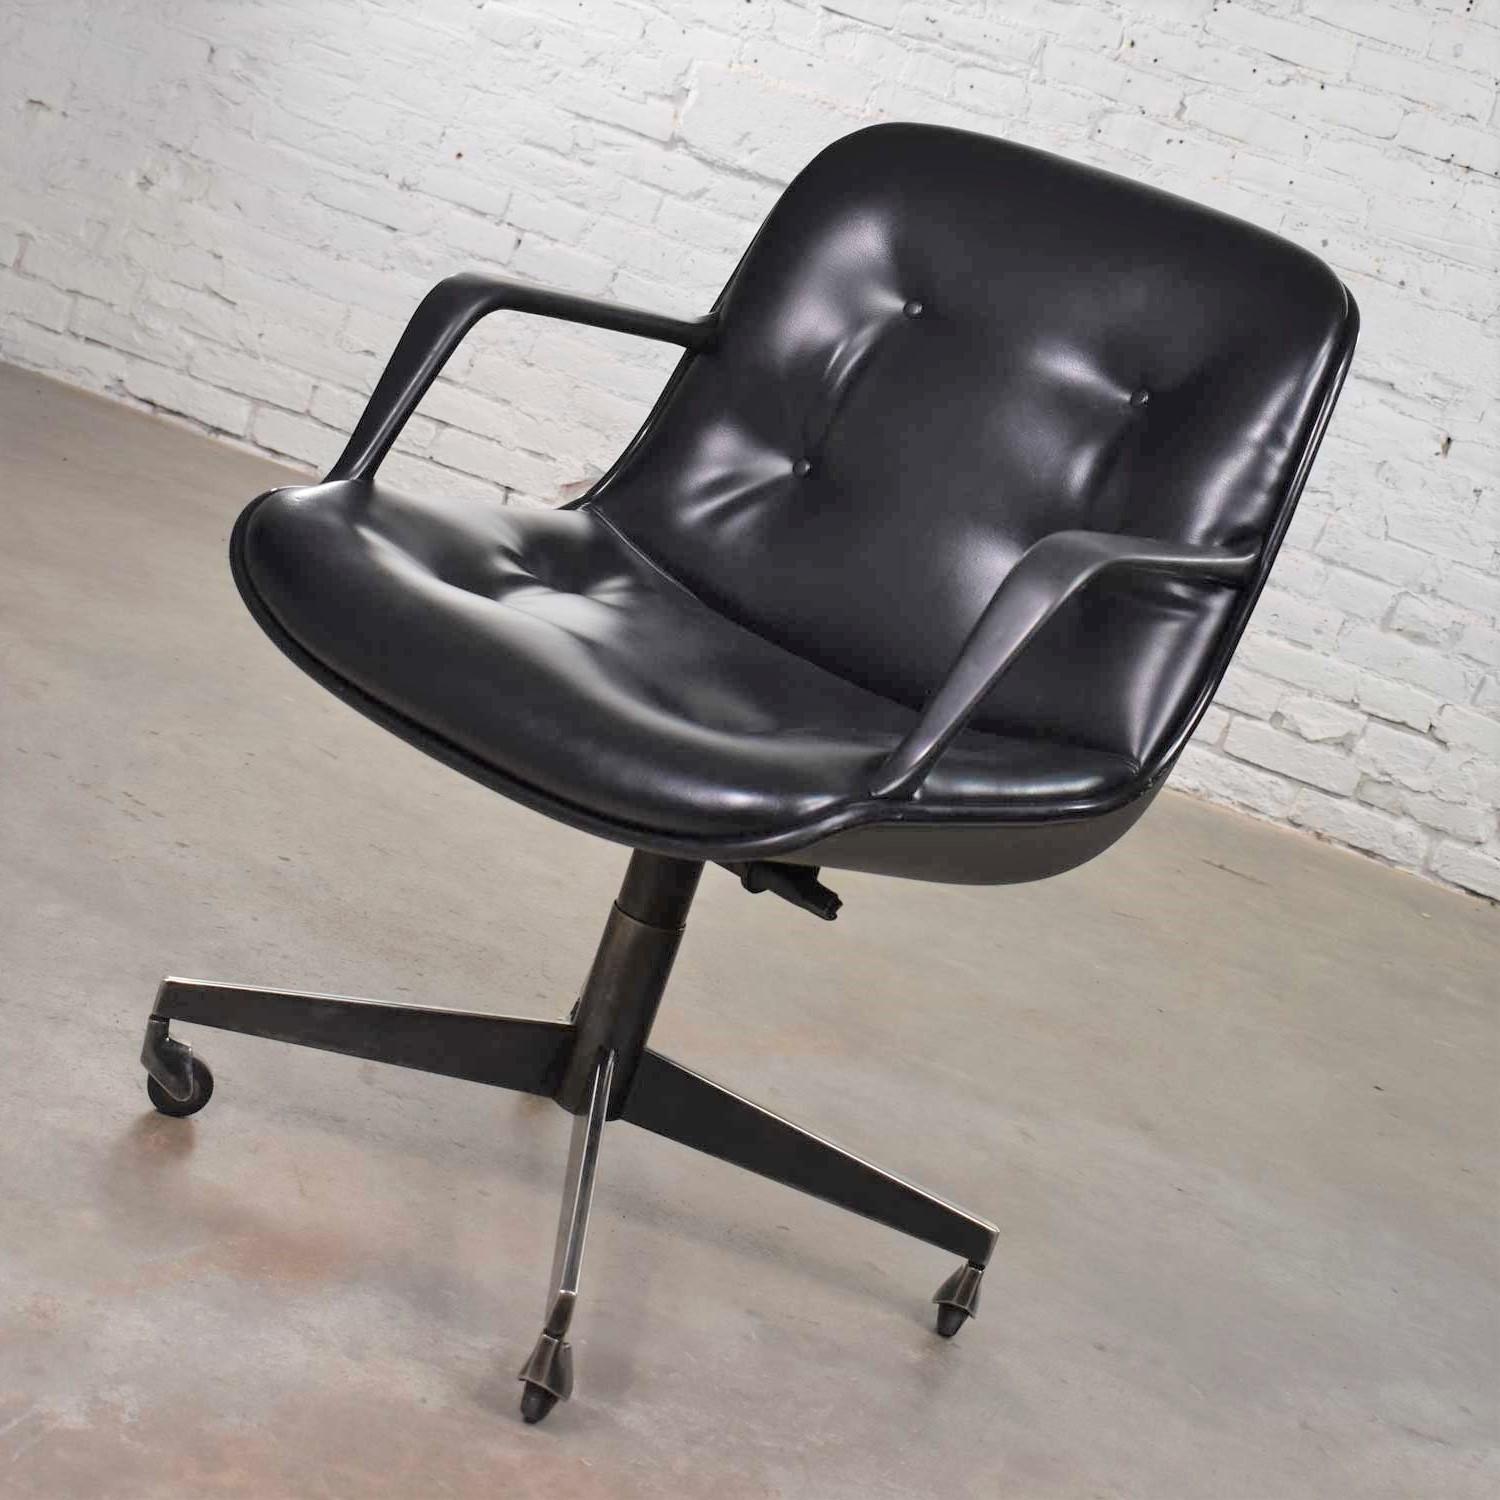 North American Vintage Modern Black Vinyl Faux Leather Steelcase 451 Office Chair Style Pollock